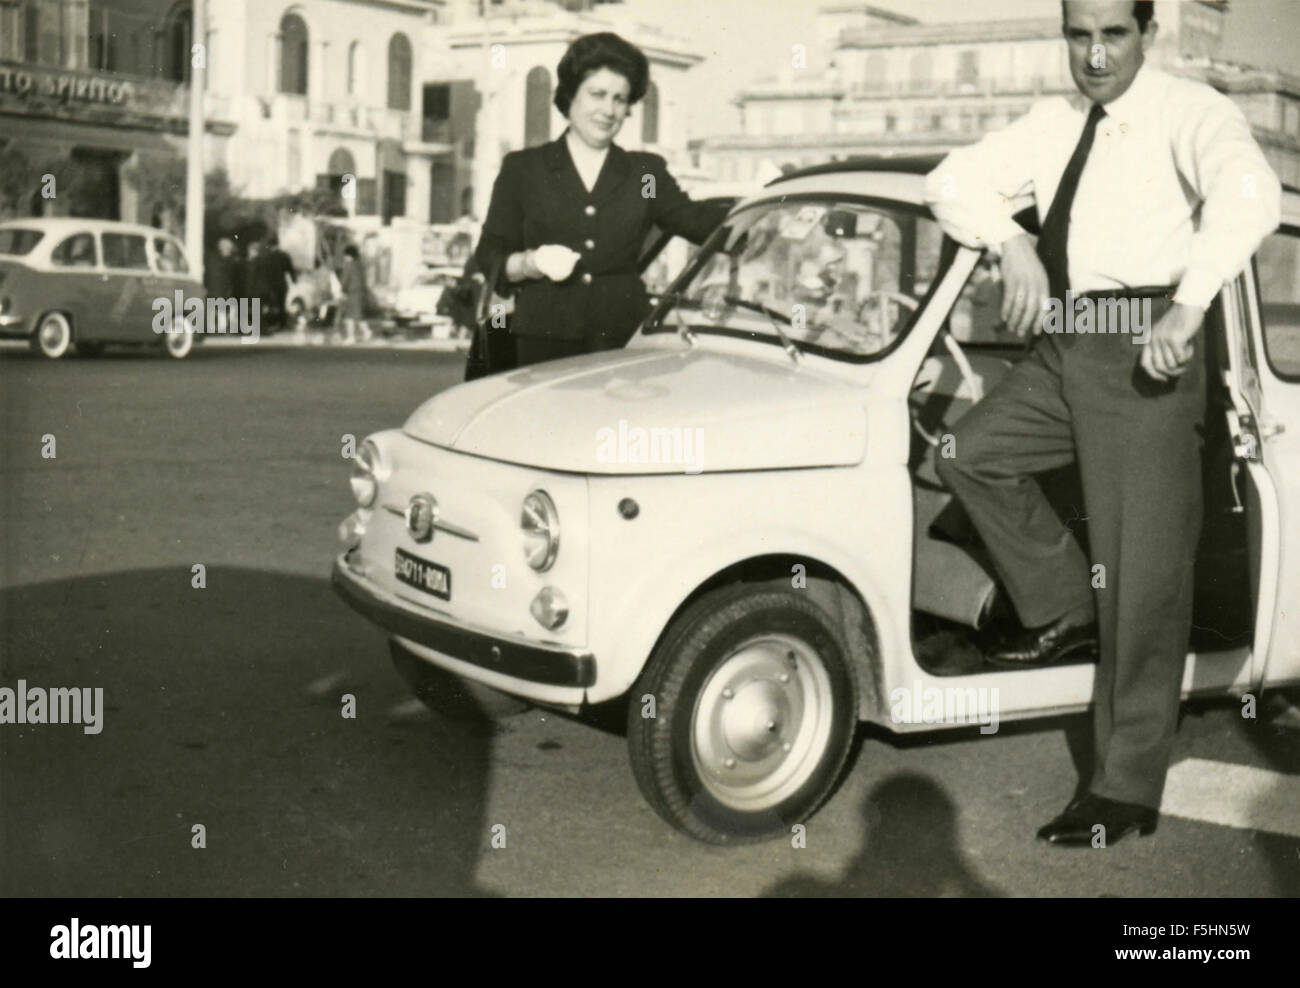 A couple with the Fiat 500 car, Italy Stock Photo